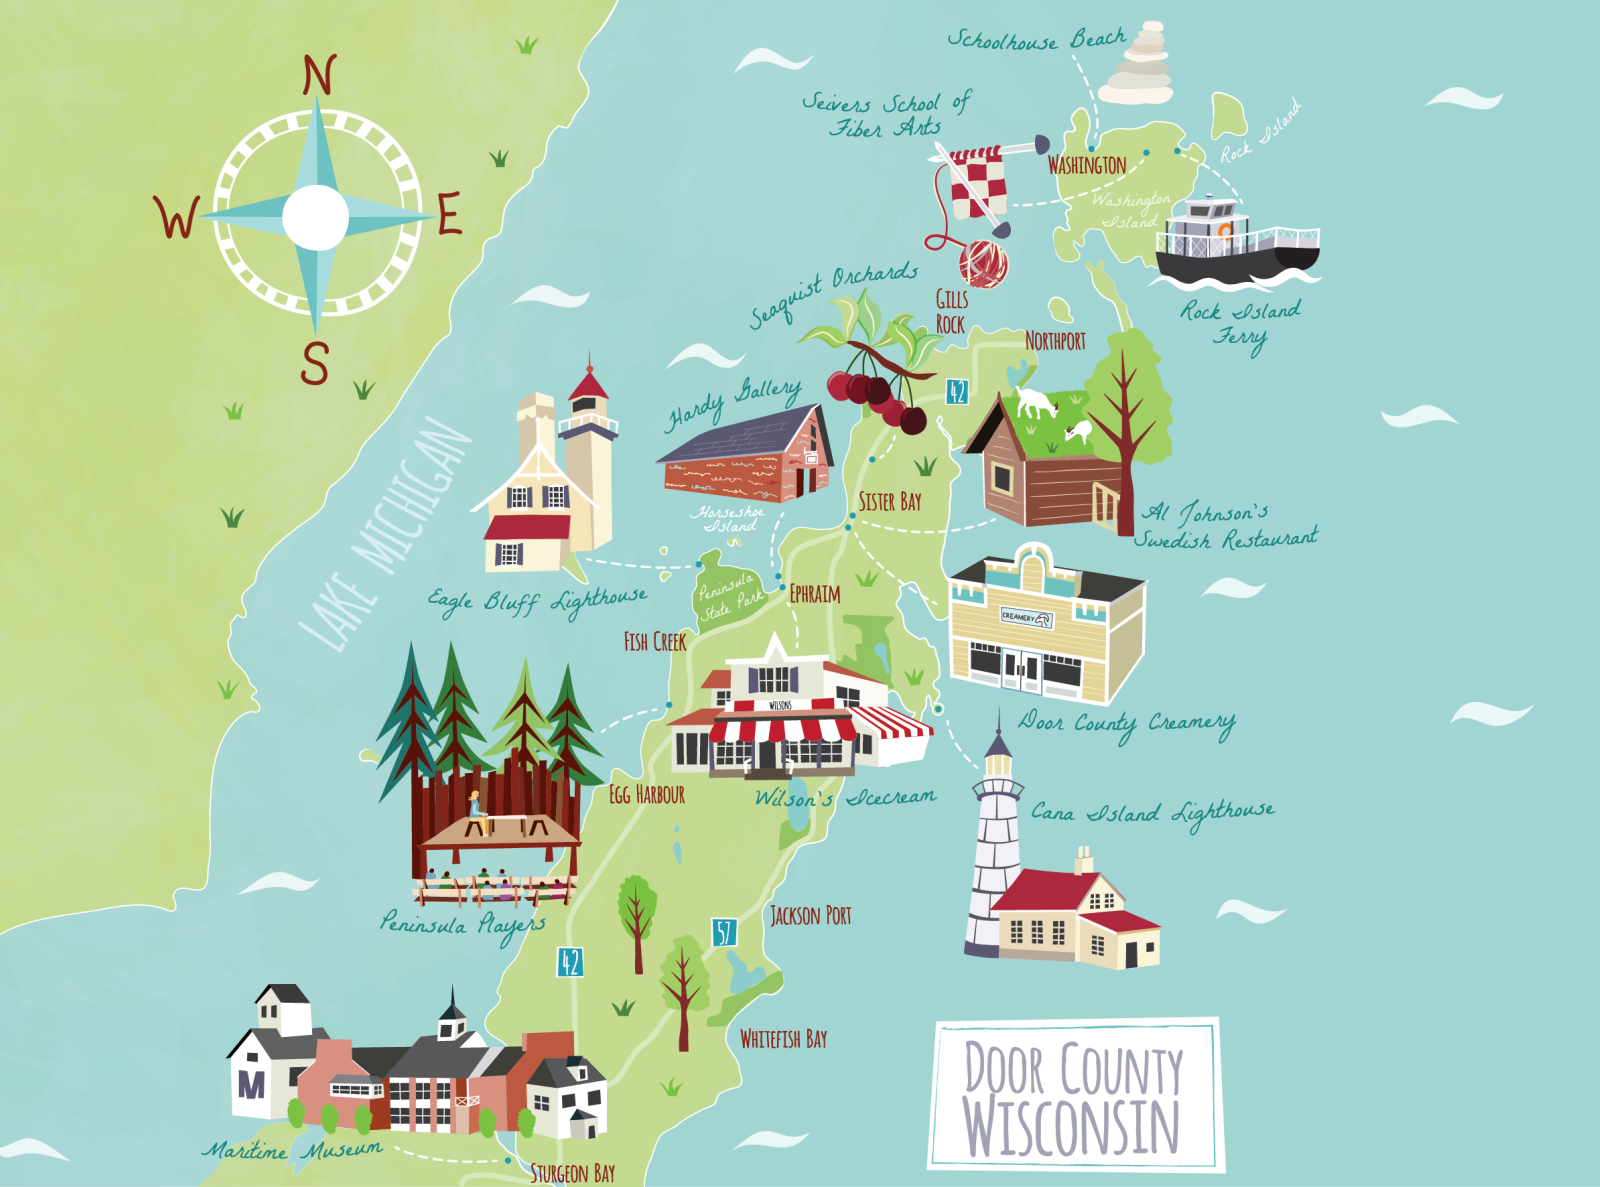 door-county-map-for-lands-end-clothing-by-bek-cruddace-on-dribbble